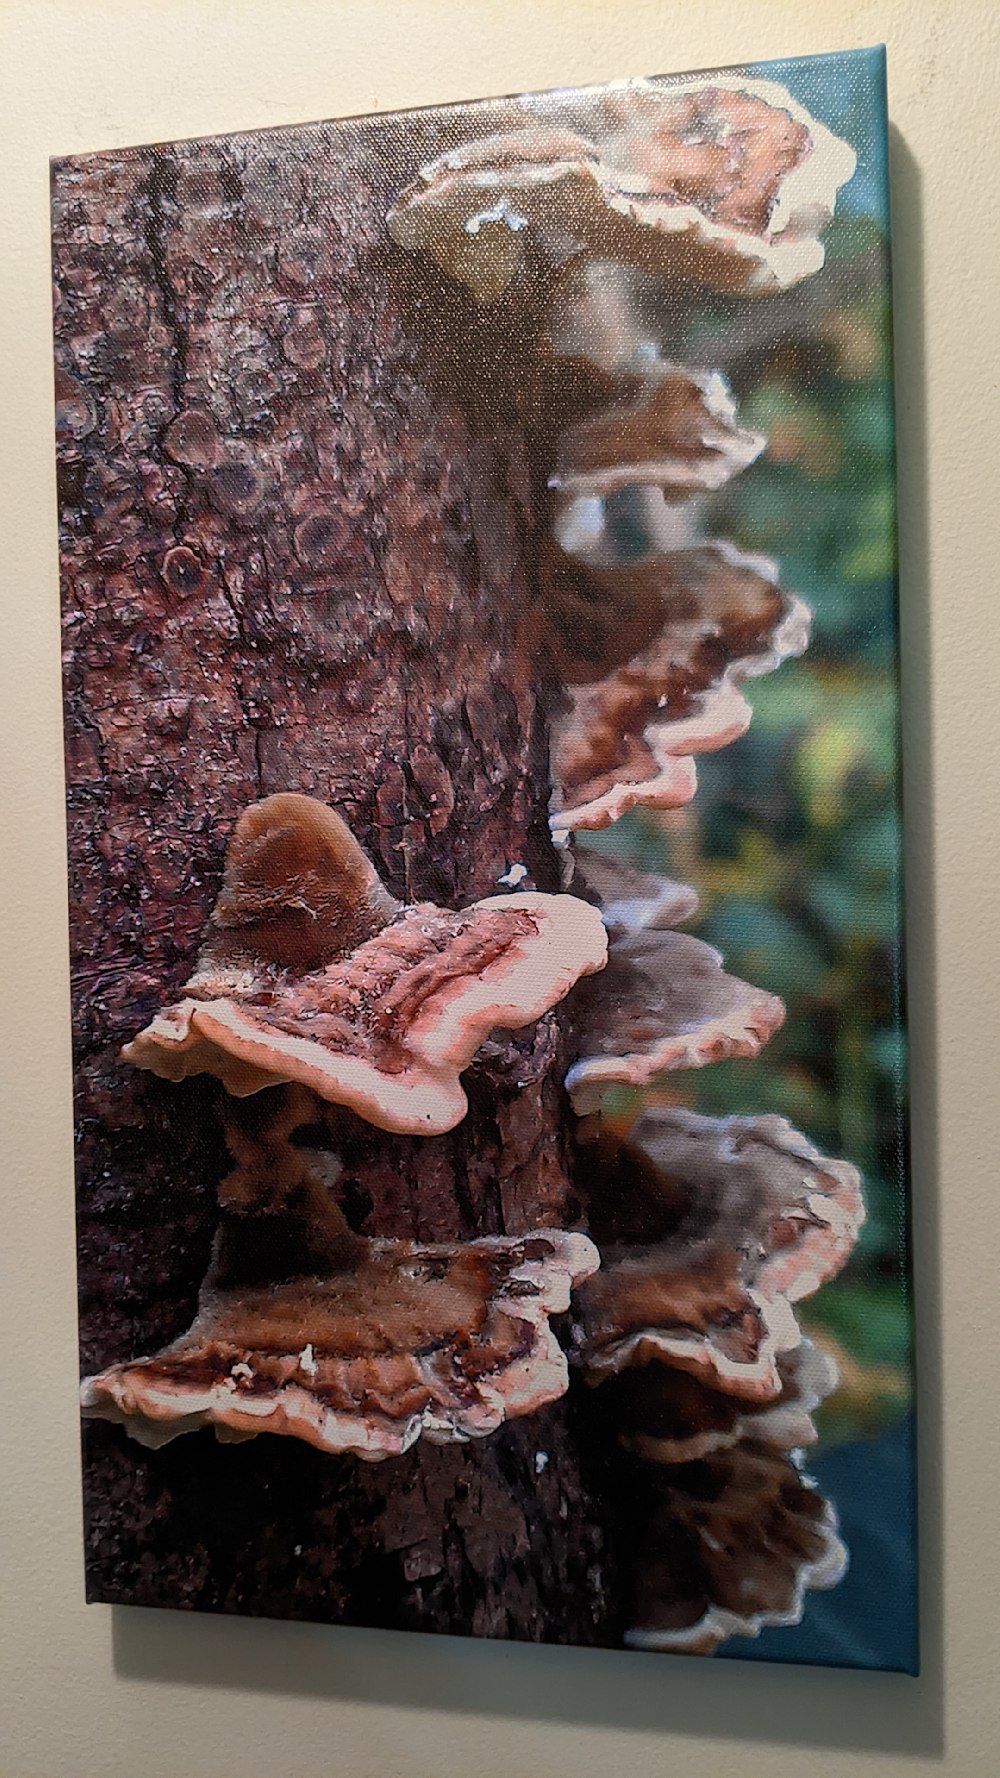 The Crowd, fungus on a tree, gallery wrapped canvas print